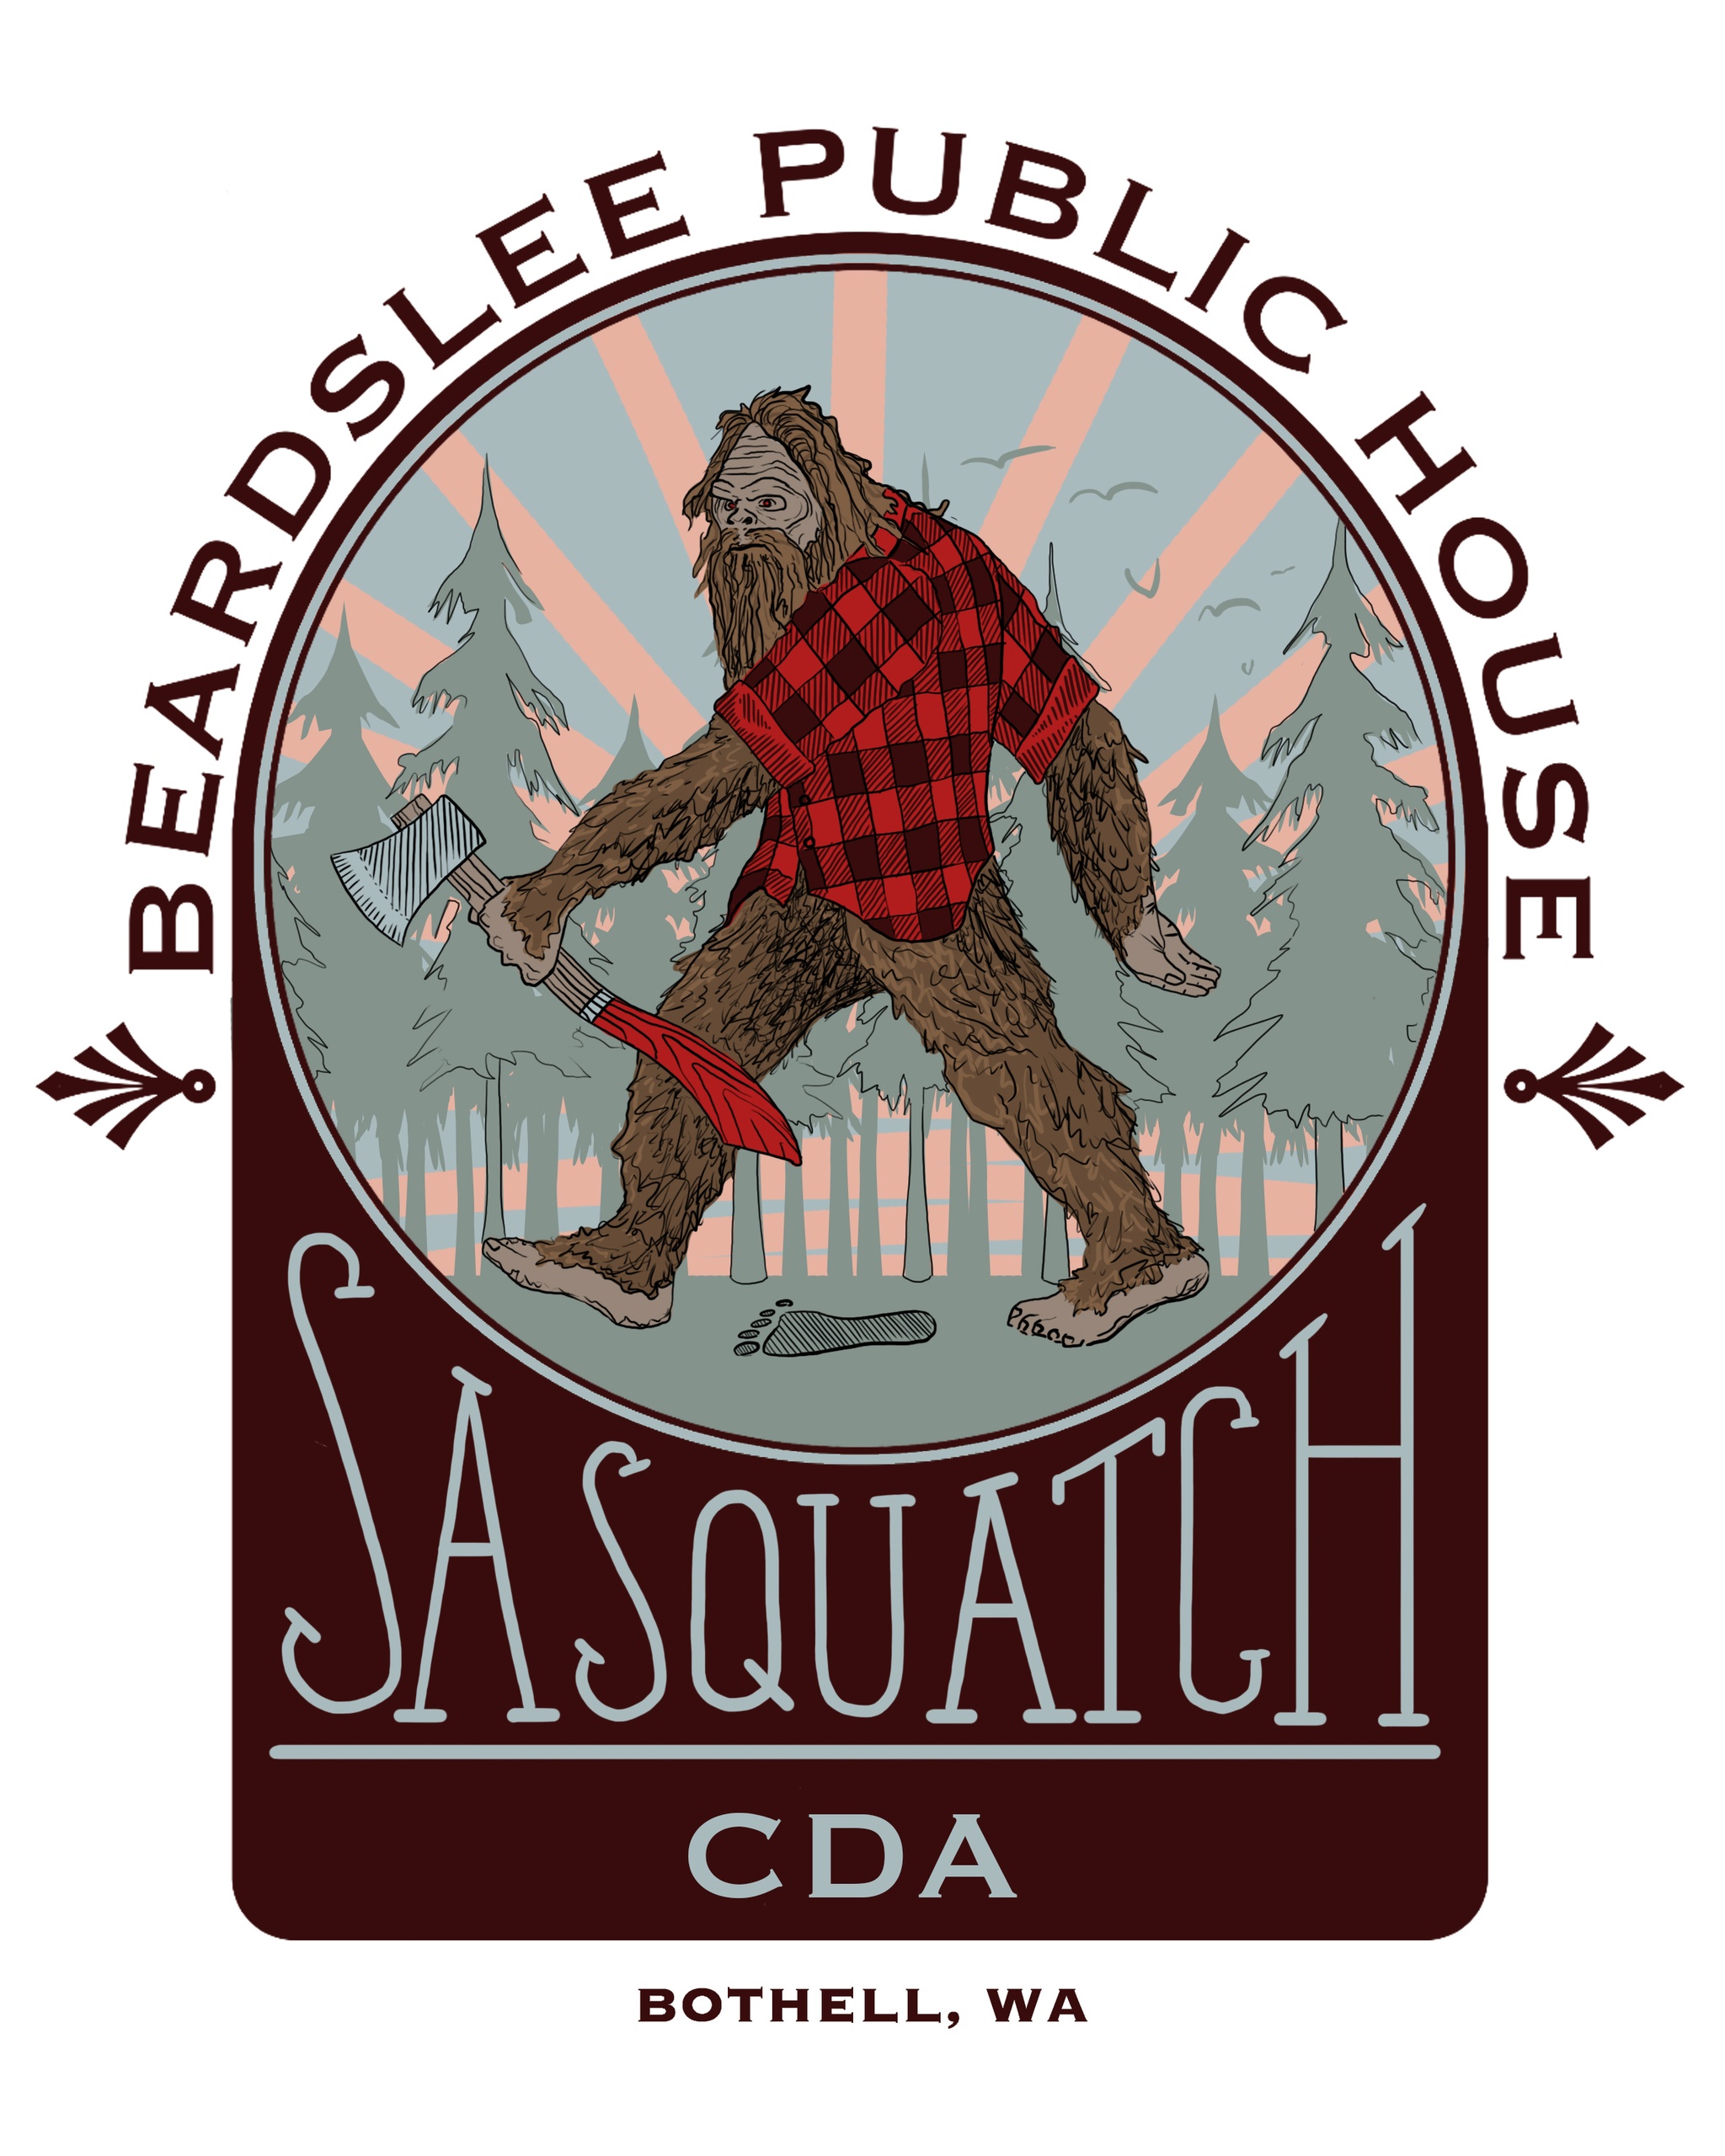 The label for Beardslee Public House's Sasquatch Cascadian Dark Ale features artwork of the famed creature. Image Credit: Beardslee Public House